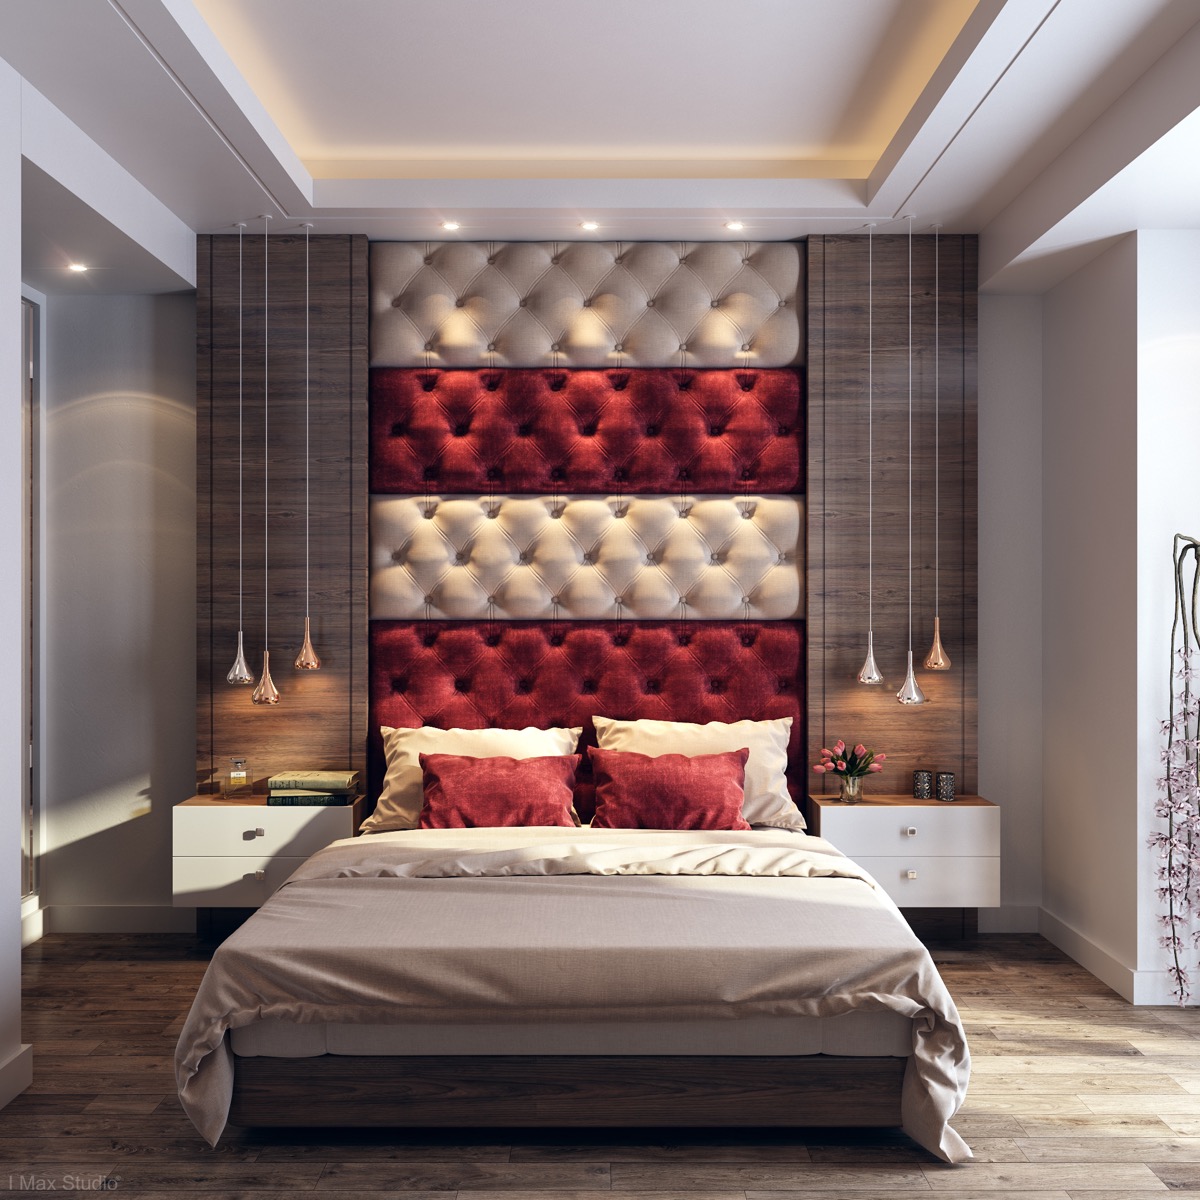 red-and-gray-bedroom-ideas.jpg